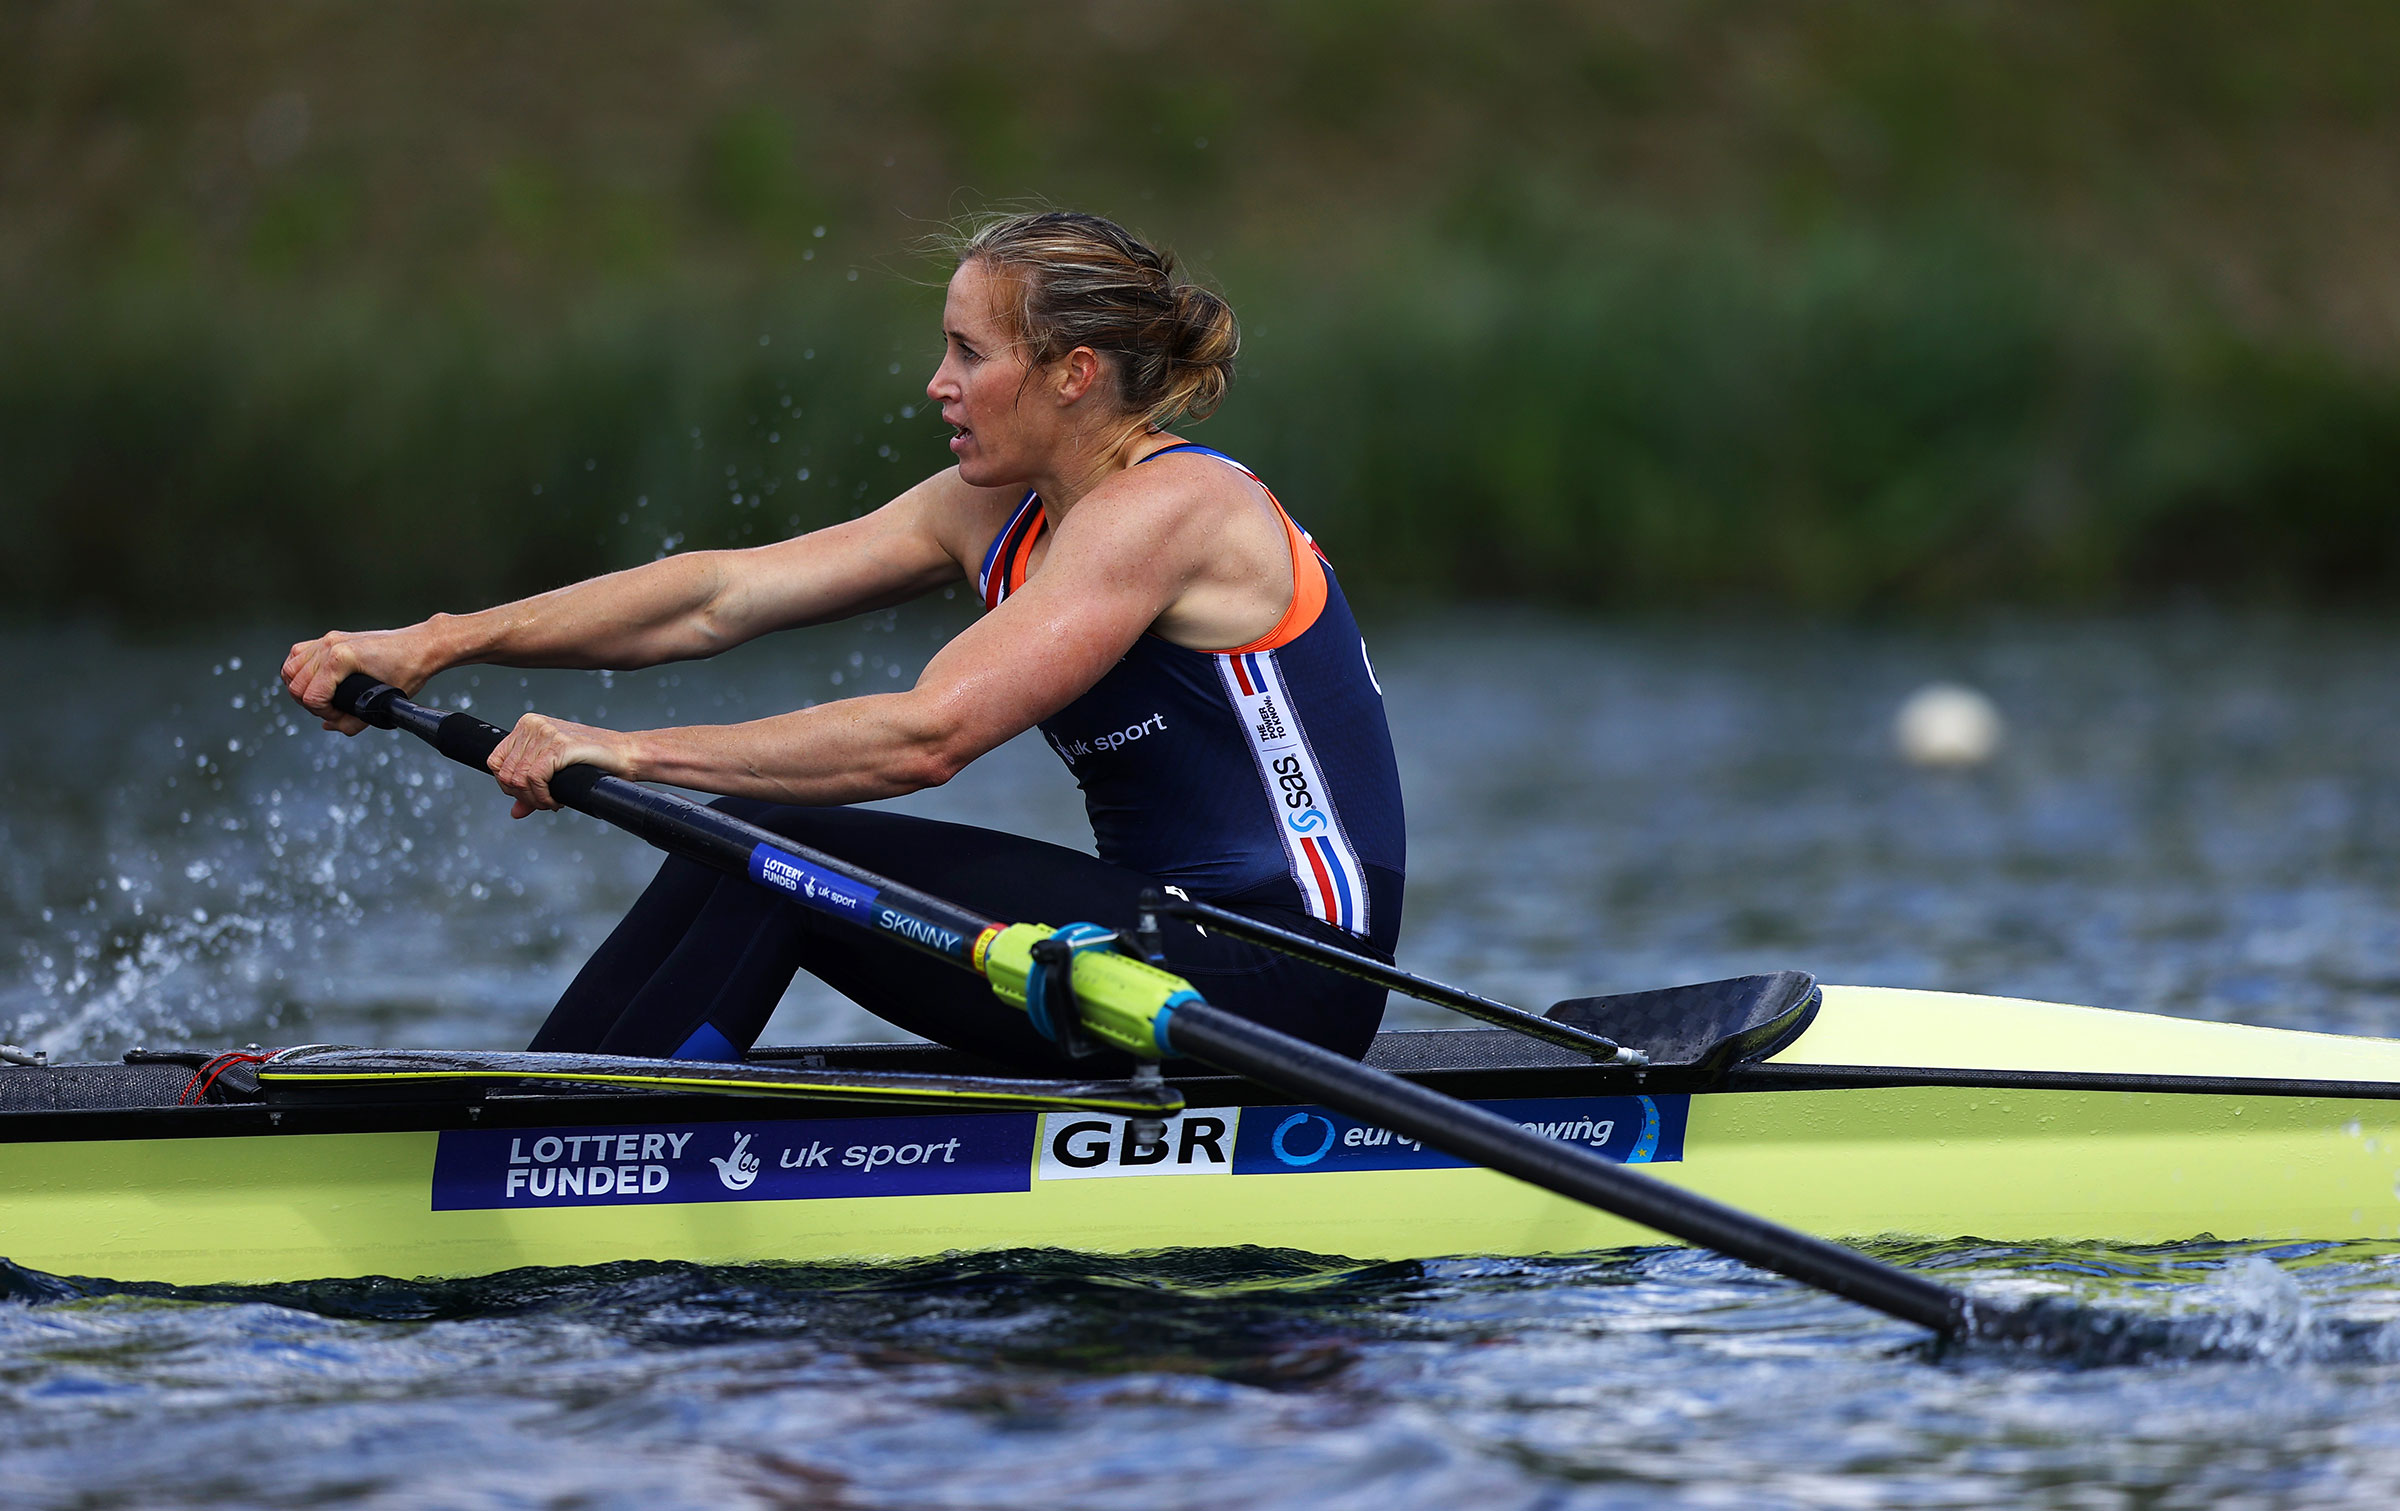 Helen Glover MBE in action during a TeamGB Rowing Training Session on May 05, 2021 in Reading, England. (Photo by Naomi Baker–Getty Images)